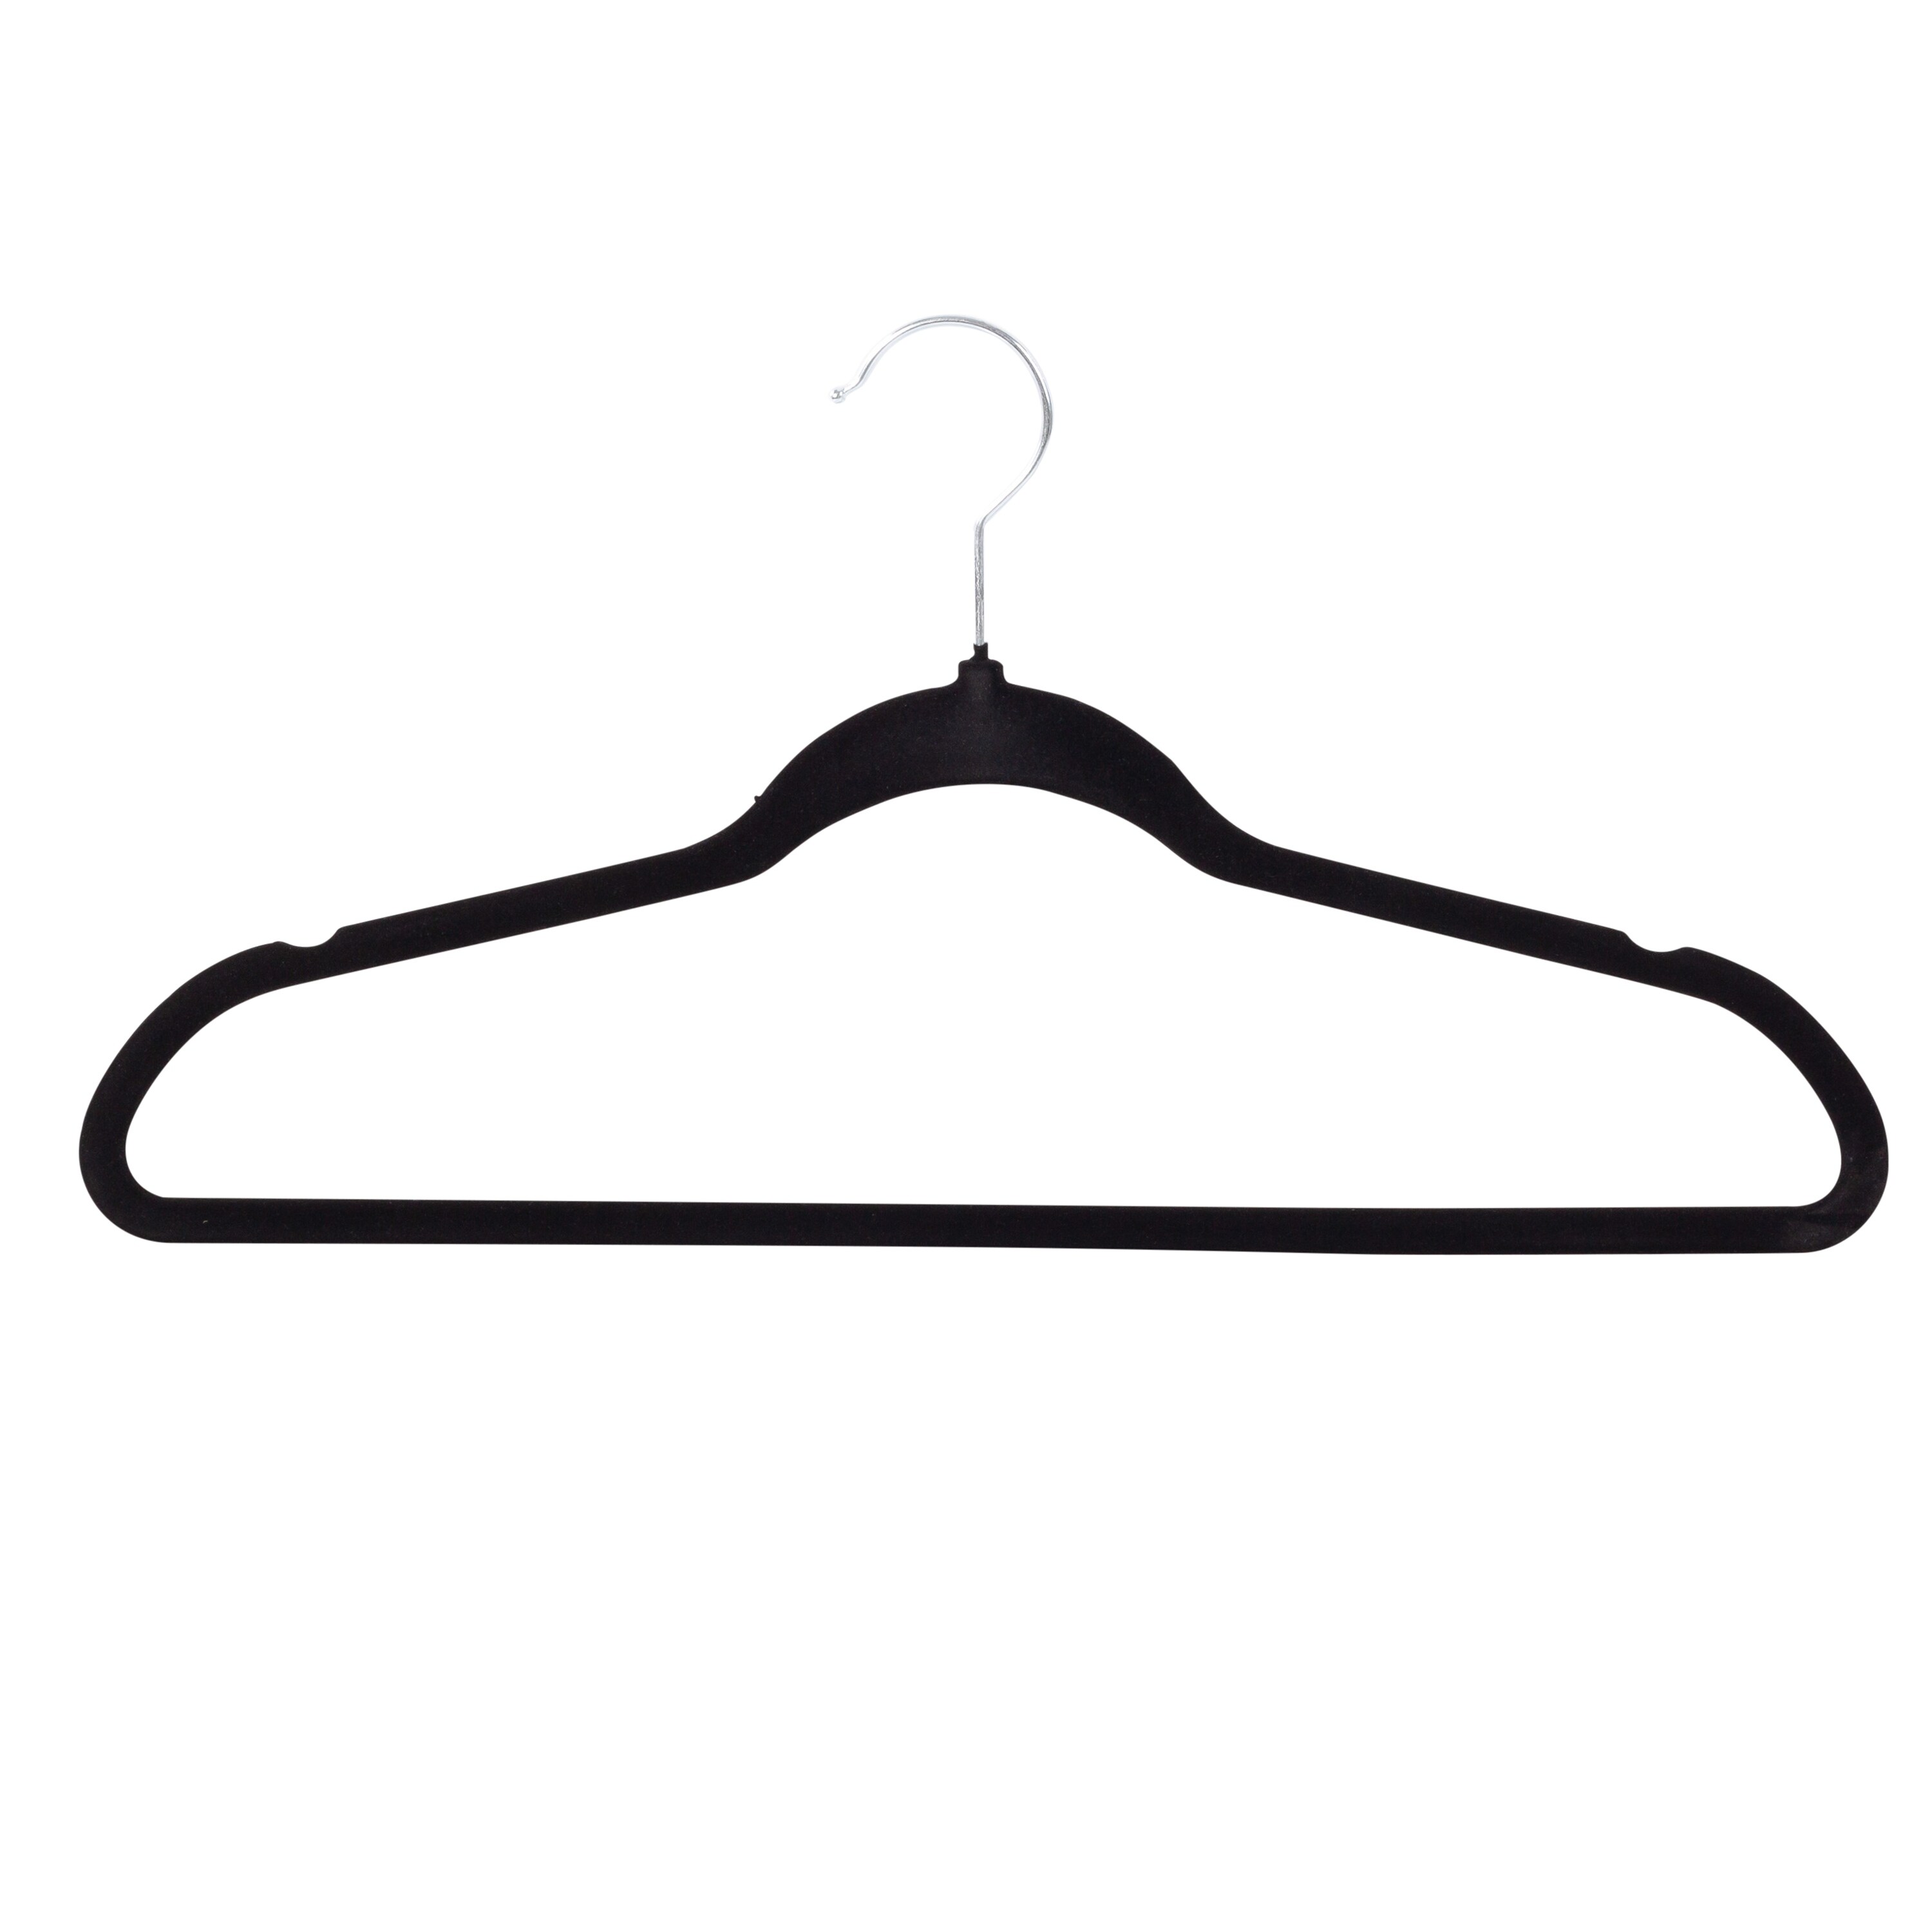 https://ak1.ostkcdn.com/images/products/is/images/direct/cf2cc885a42cbcb608942297278fa246a56e1138/Plastic-and-Velvet-Non-Slip-Hangers-%2835-Pack%29.jpg